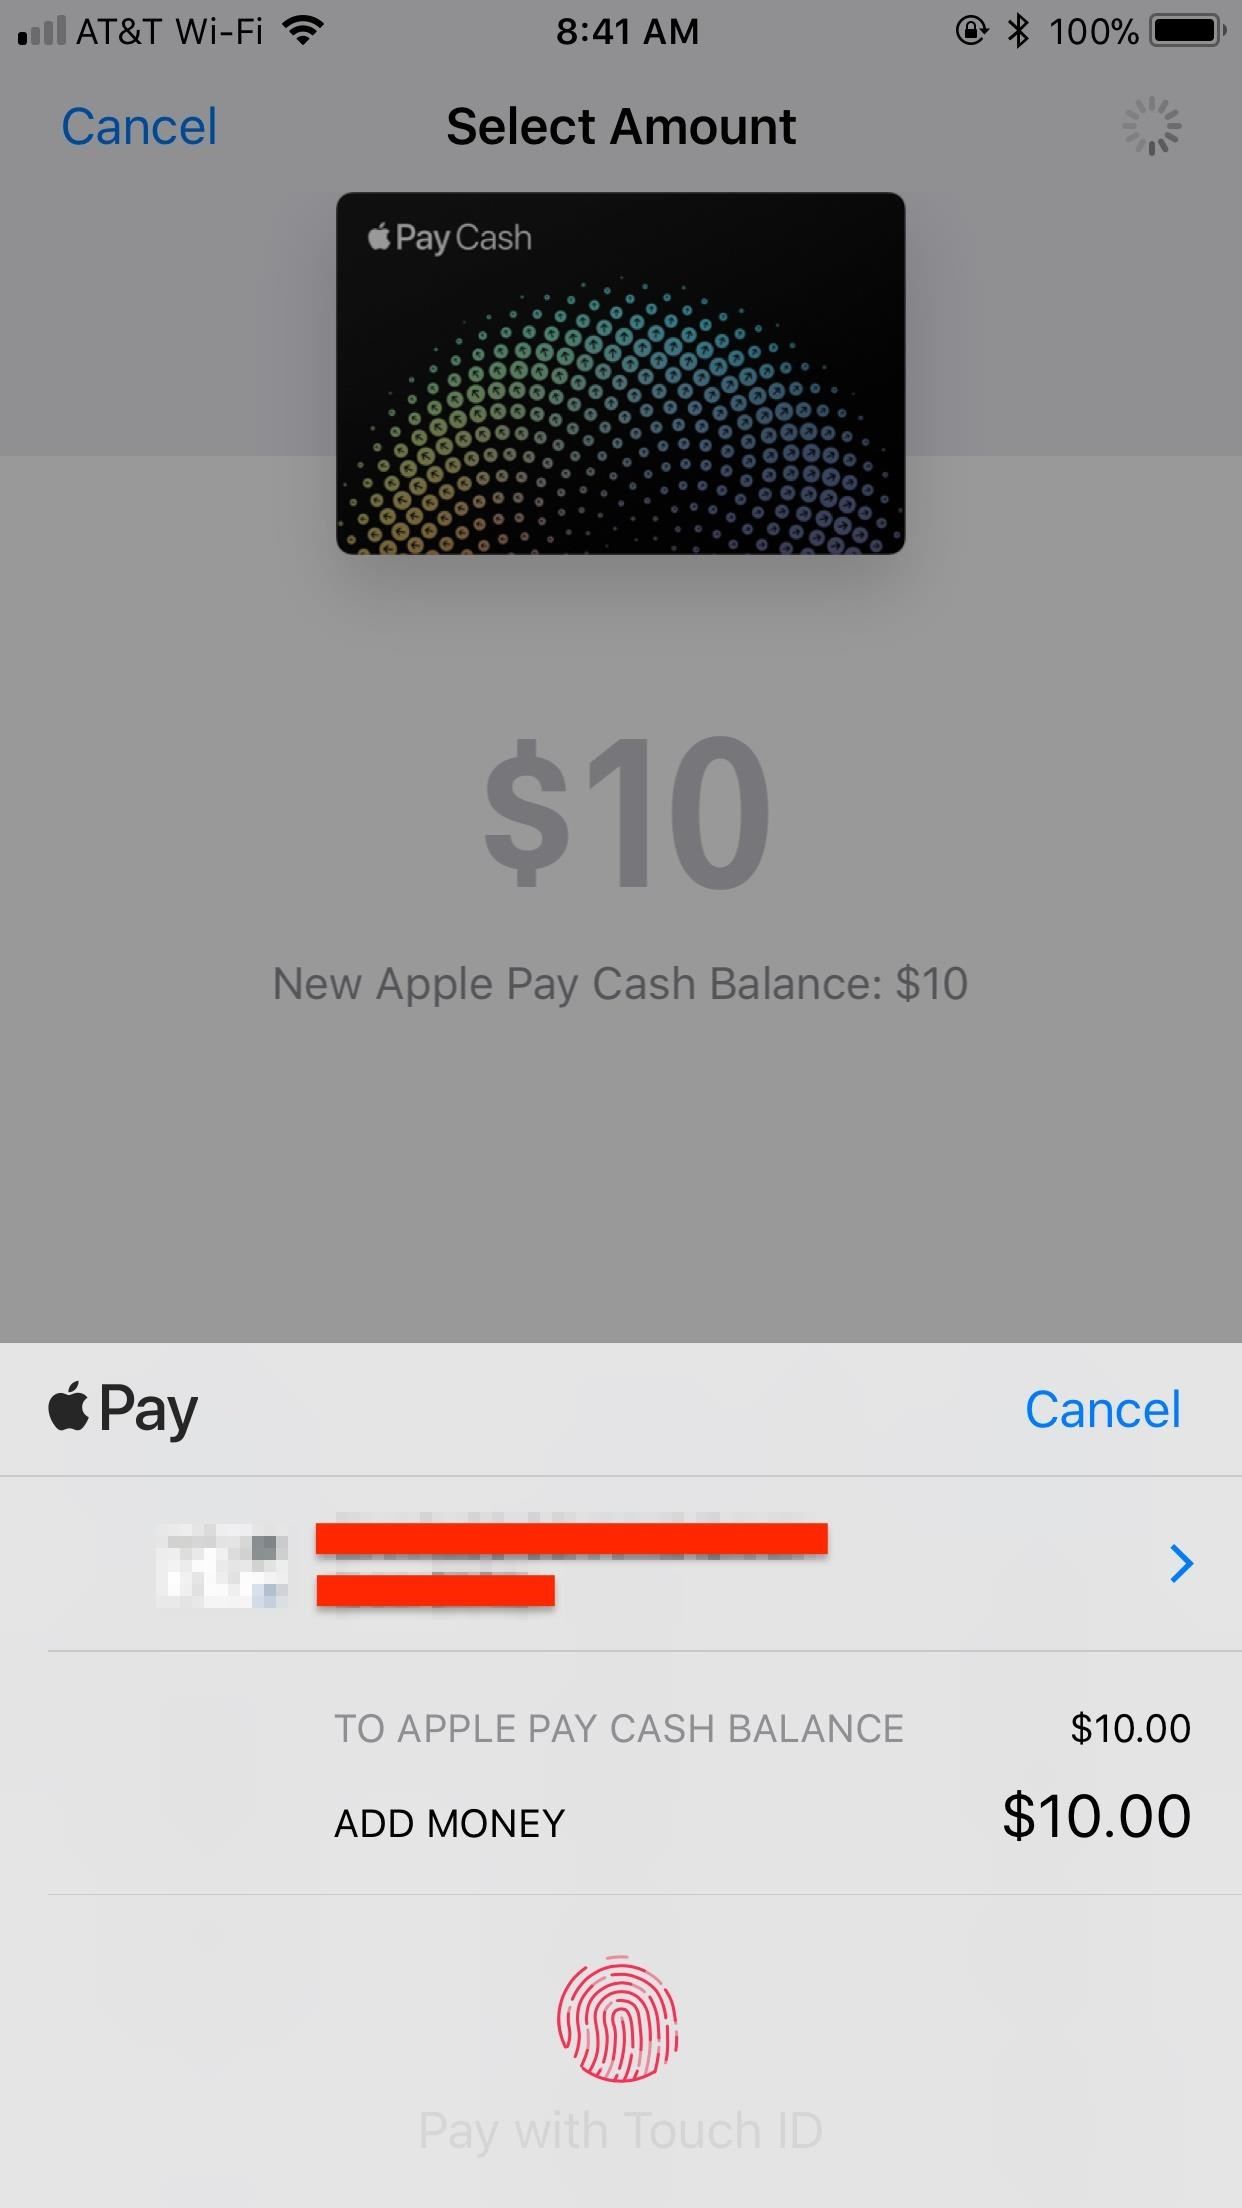 Apple Pay Cash 101: How to Add Money to Your Card Balance